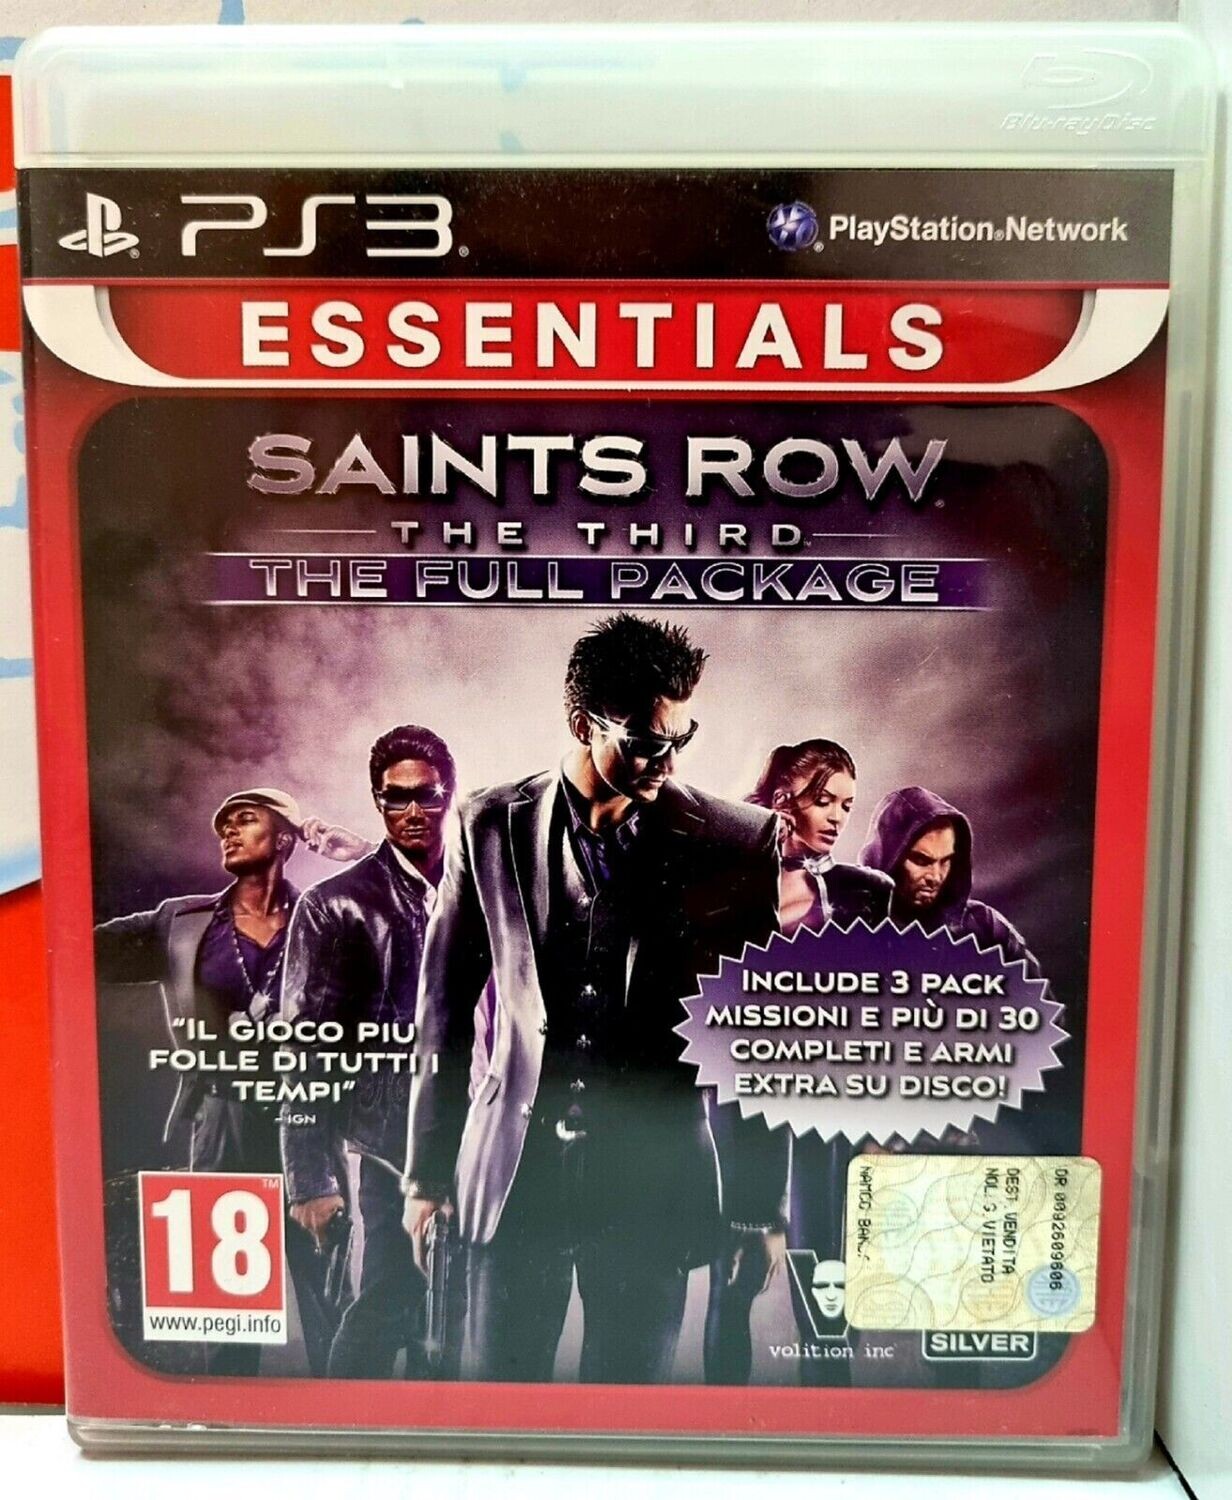 SAINTS ROW THE THIRD FULL PACKAGE - PS3 ITALIANO INCLUDE I DLC